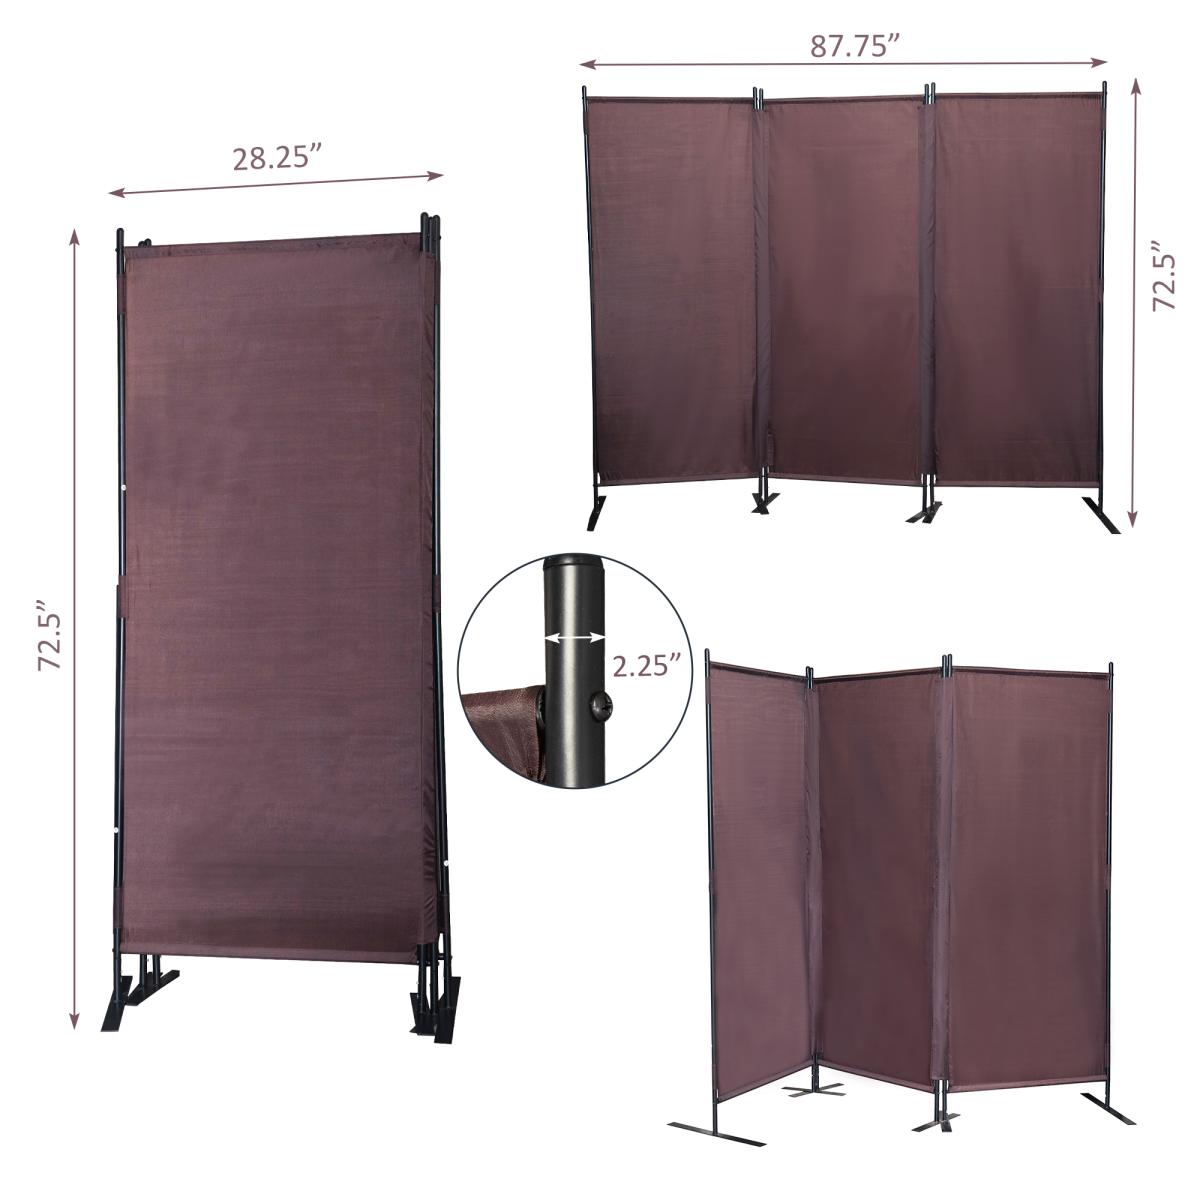 6 Ft Modern Room Divider, 3-Panel Folding Privacy Screen w/ Metal Standing, Portable Wall Partition, Brown